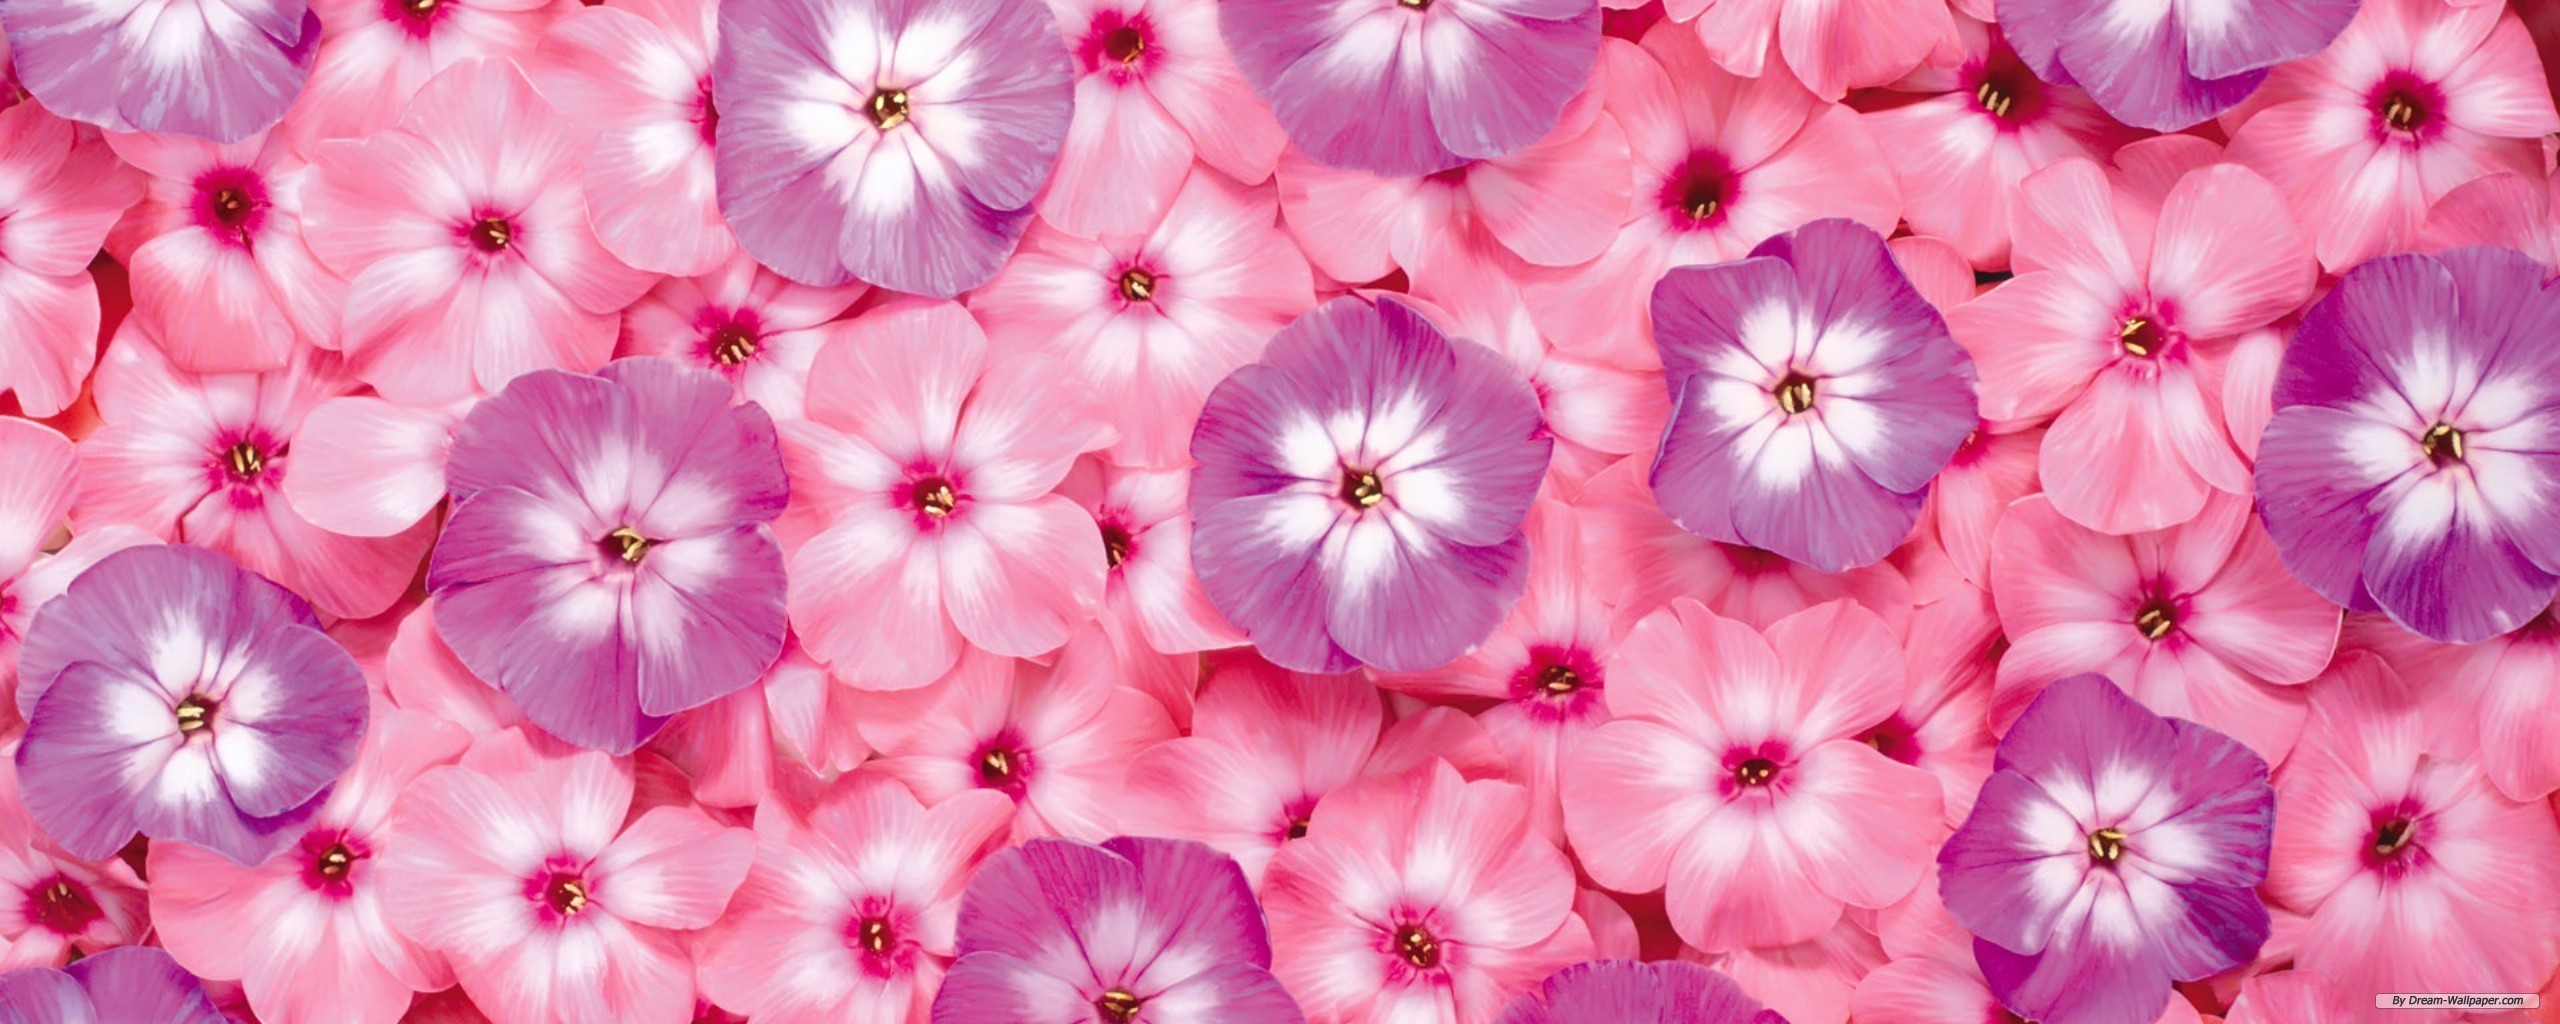 Flowers Pictures Images Free For Desktop 5 HD Wallpapers